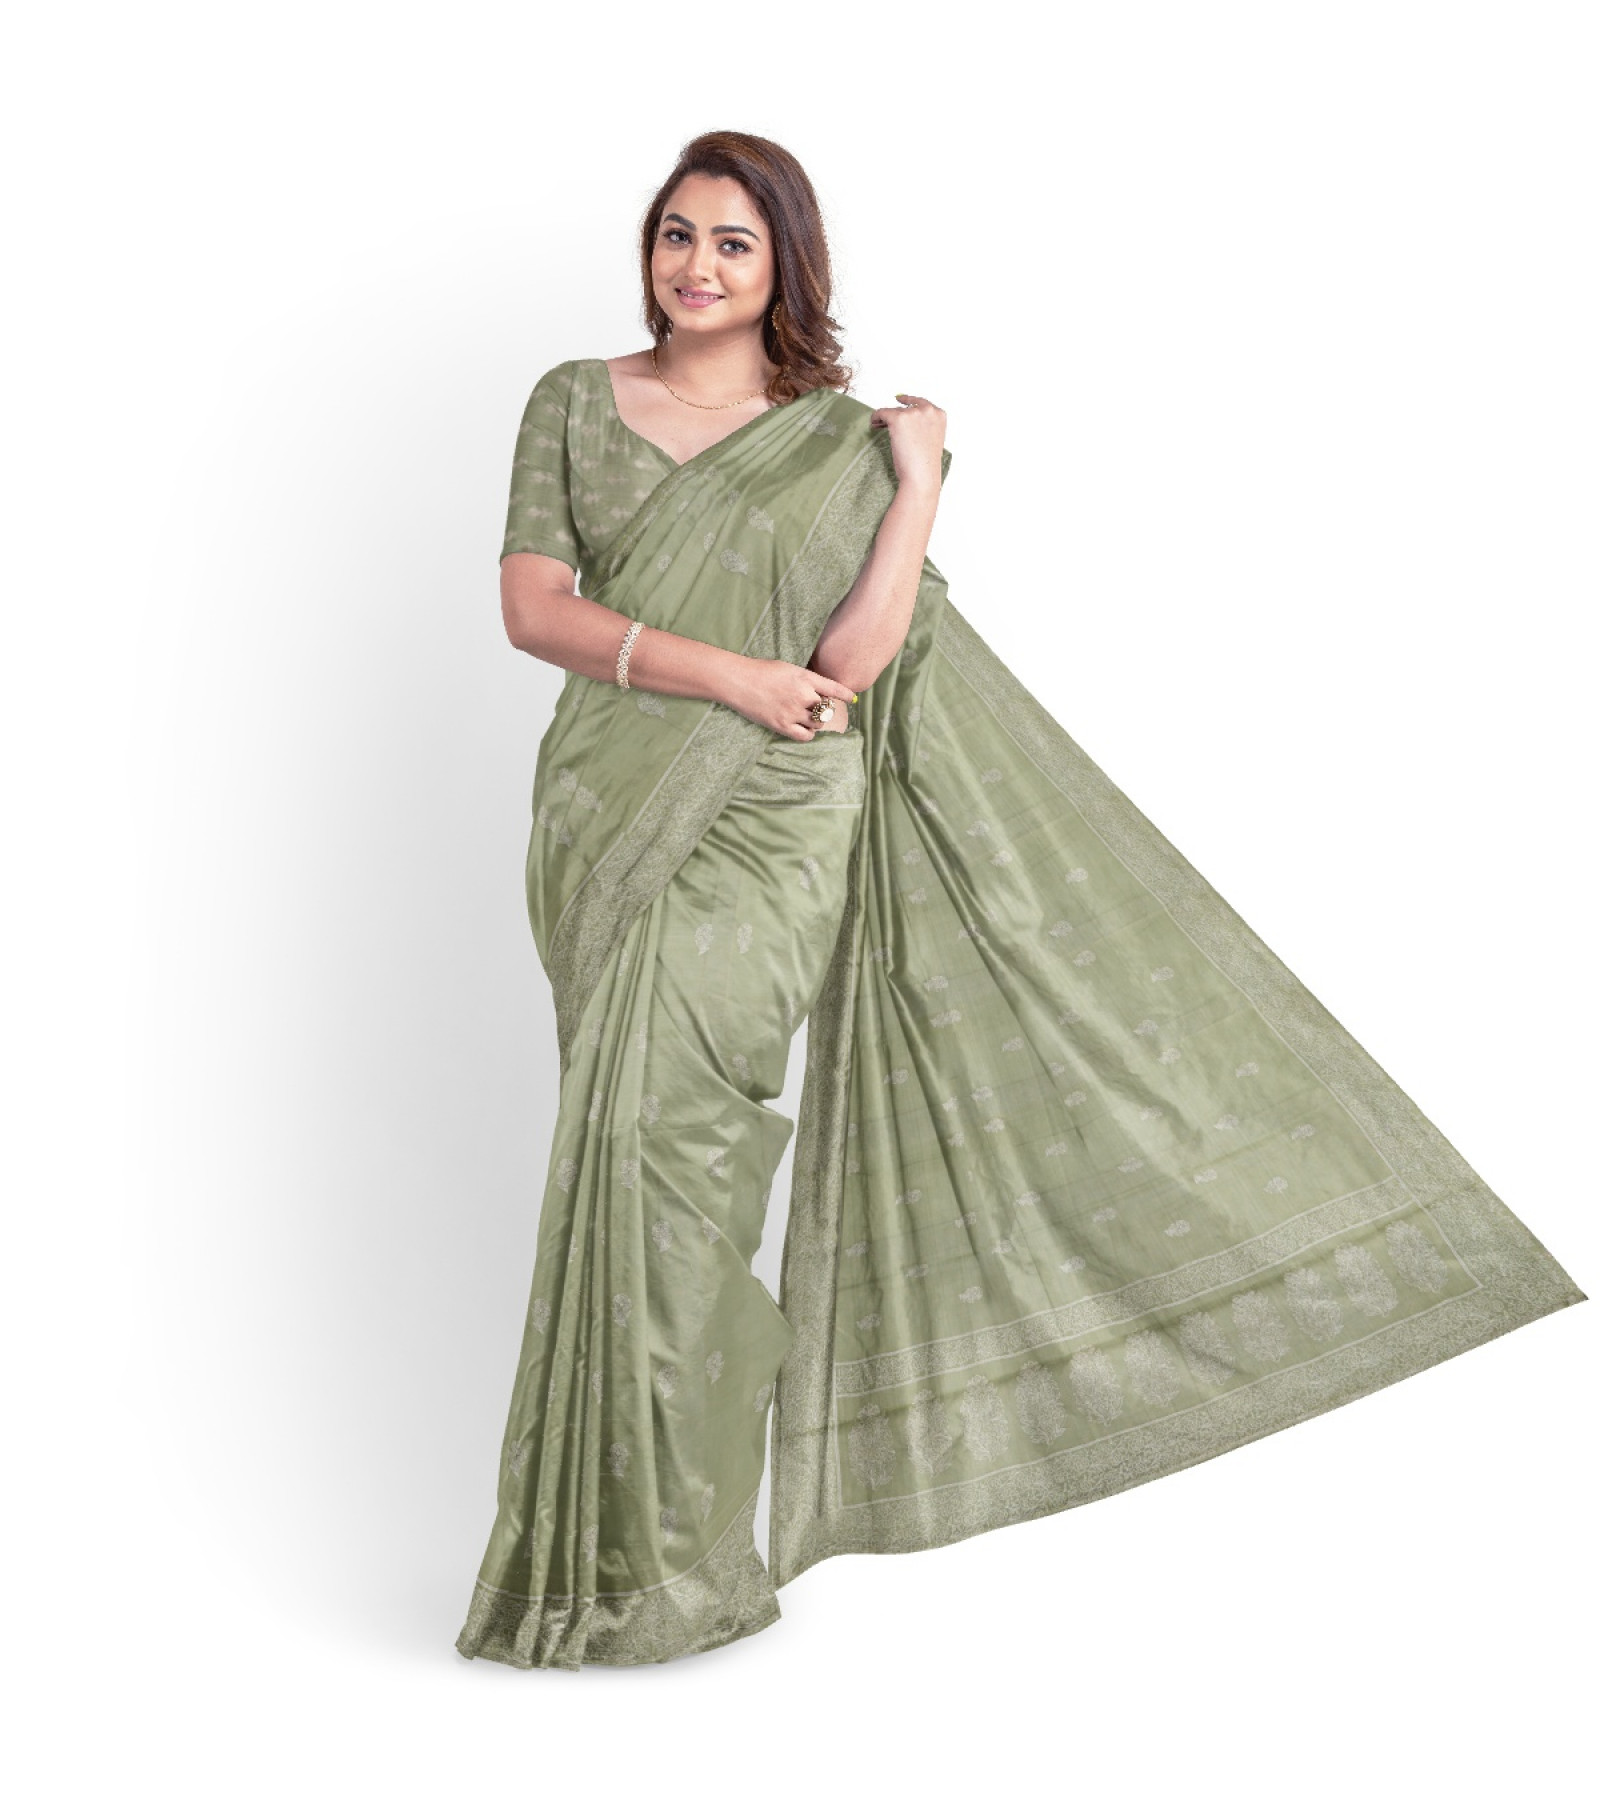 Exclusive Light Green Embroided Tussar Saree by Abaranji 